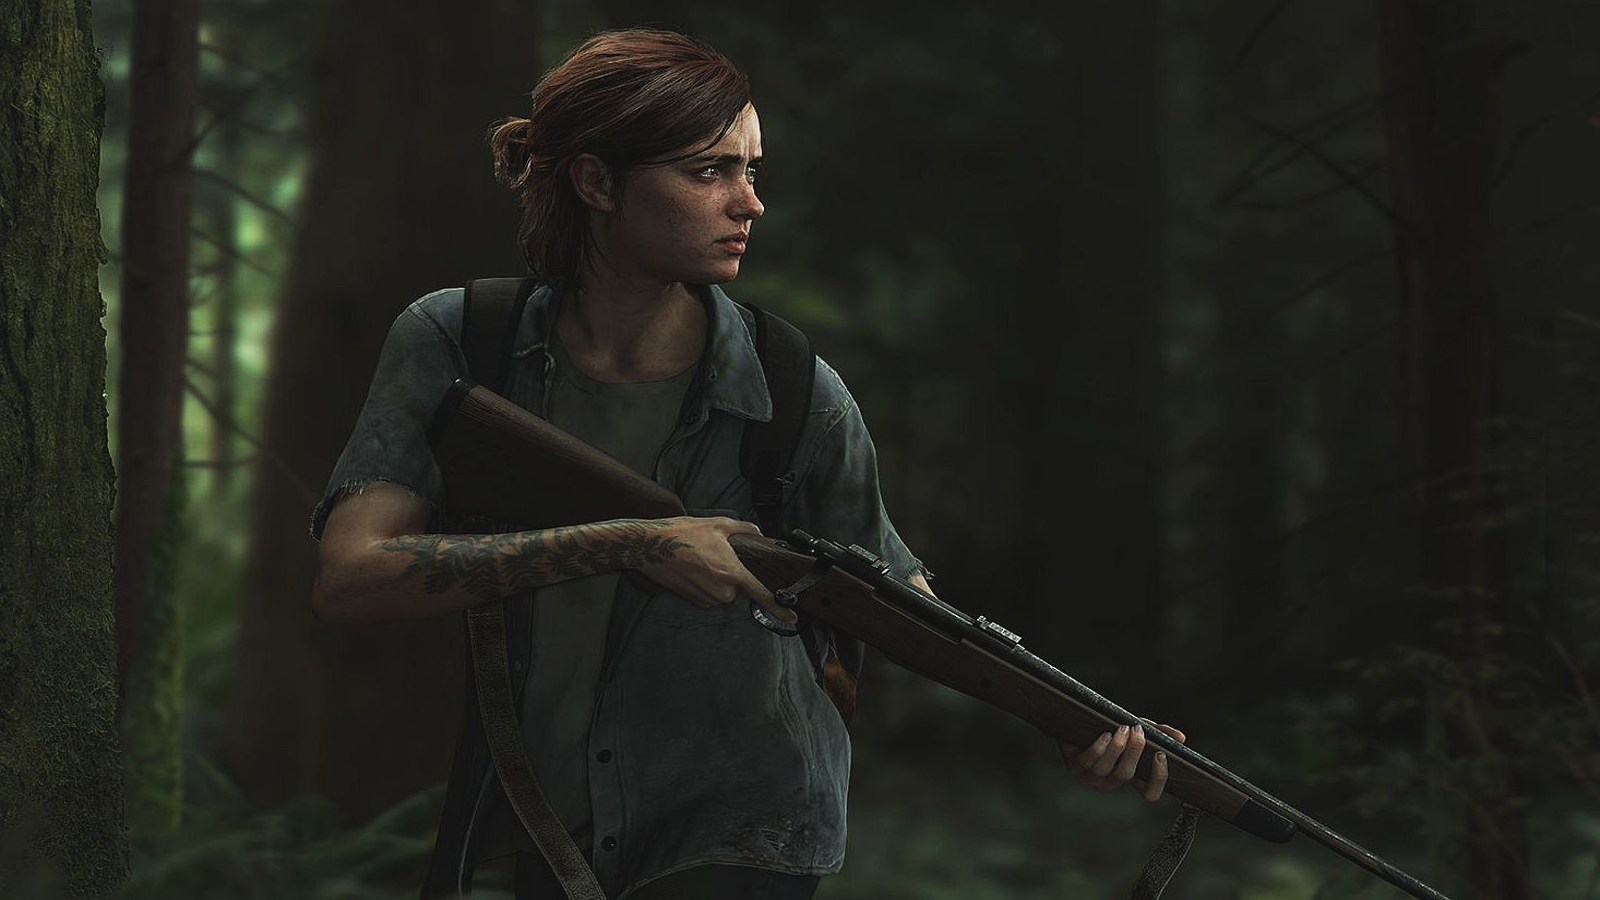 The 'Review Bombing' Of TLOU2 on Metacritic - Gadgets Middle East